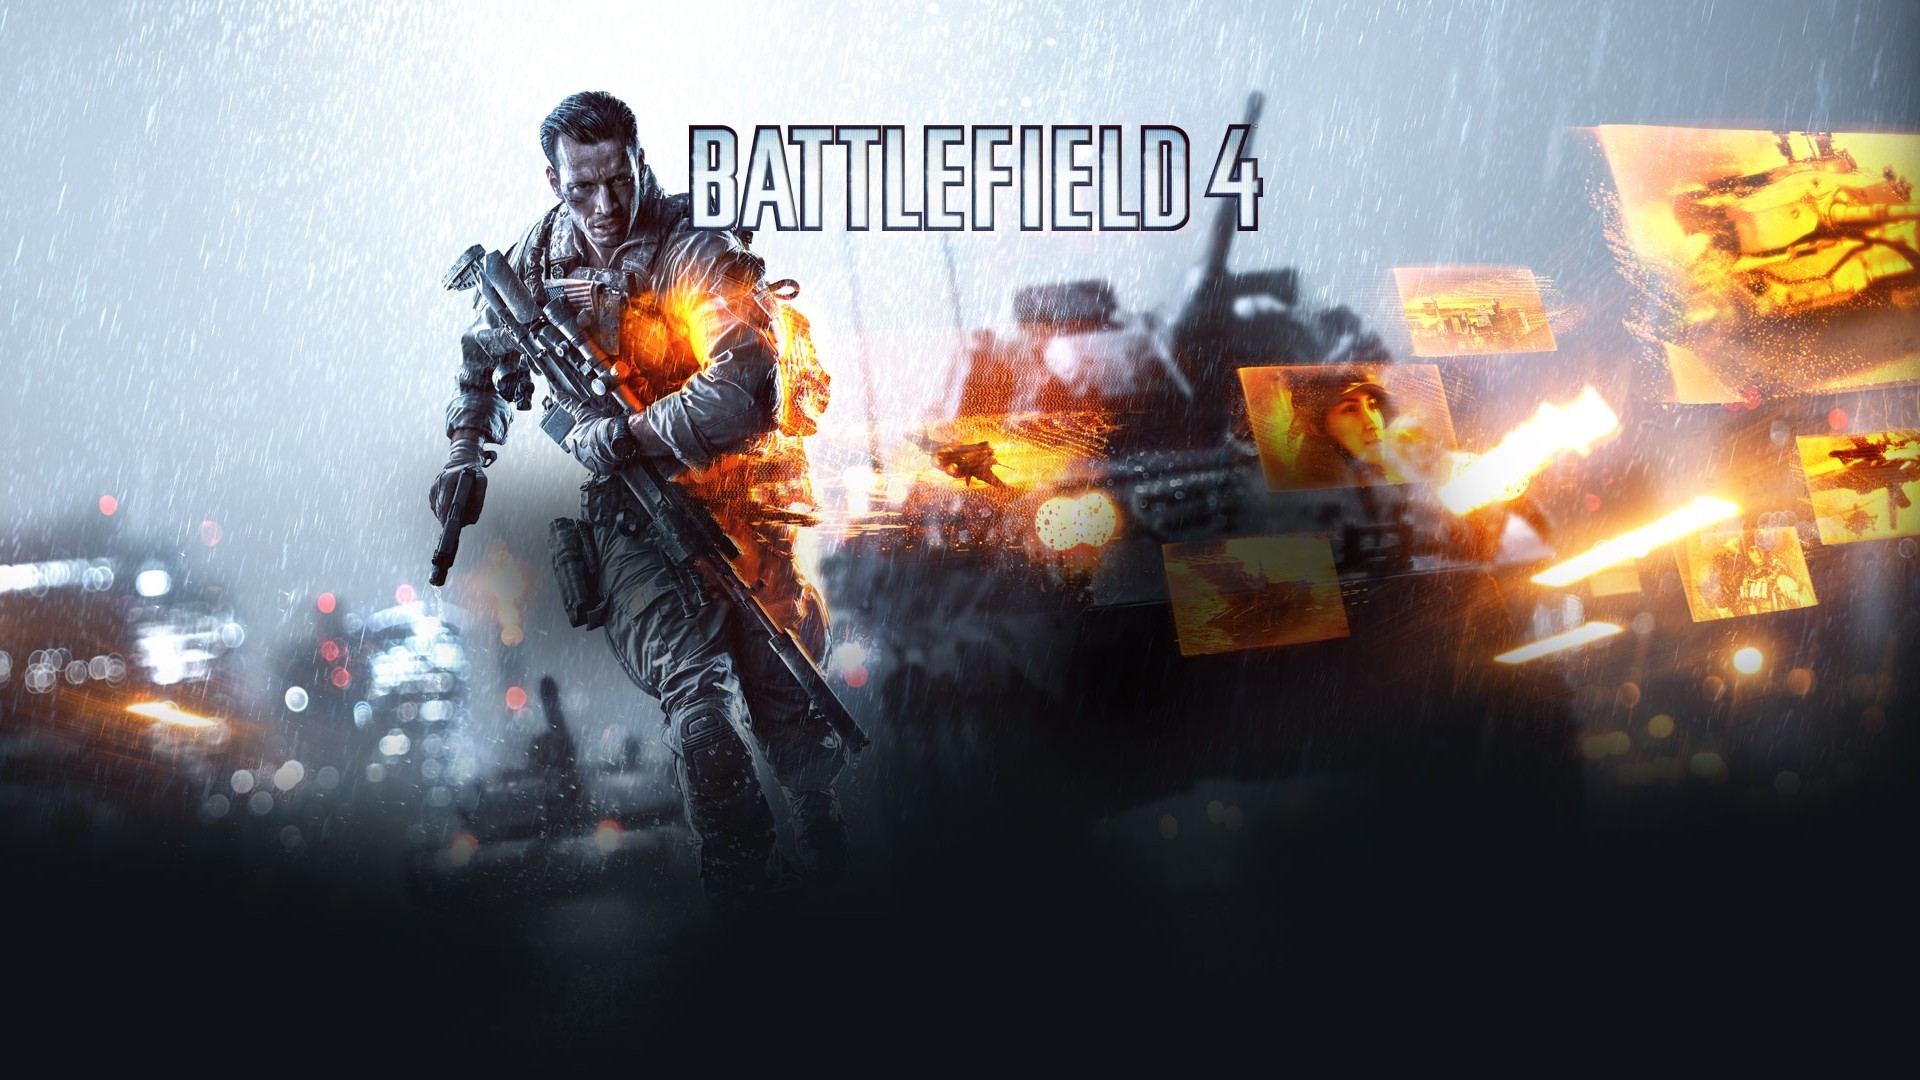 General 1920x1080 Battlefield 4 video games video game art PC gaming weapon video game men